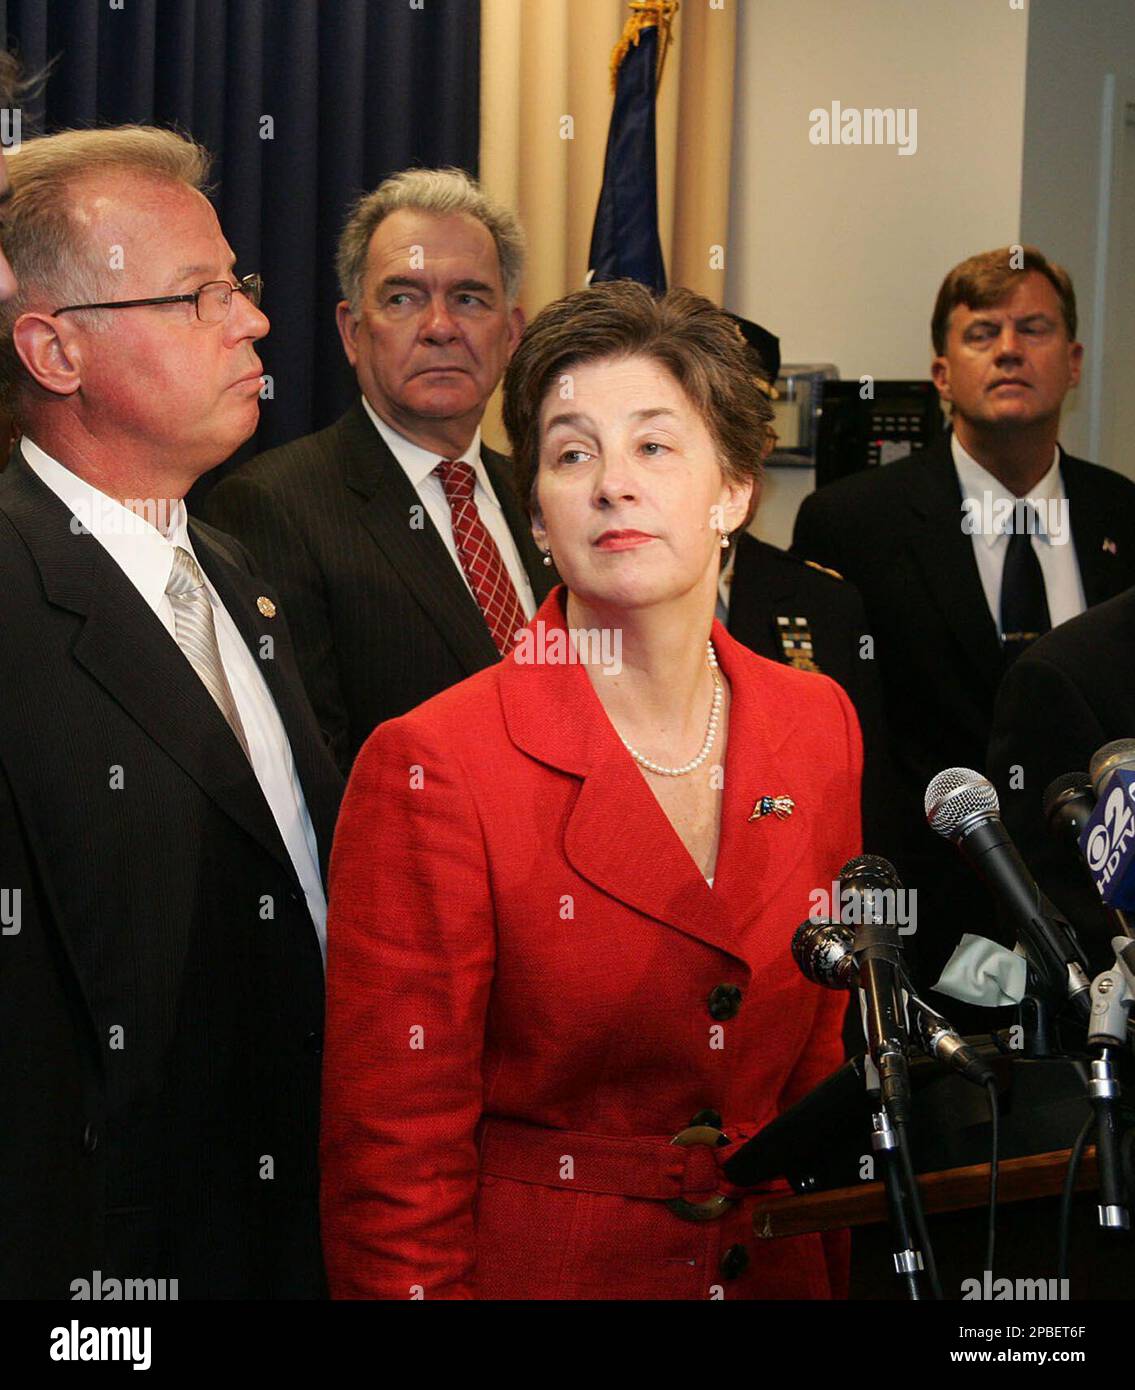 U.S. Attorney Roslynn R. Mauskopf, center, appears at an FBI news conference in New York, Saturday, June 2, 2007. Three people were arrested and one other was being sought Saturday in connection to a plan to set off explosives in a fuel line that feeds John F. Kennedy International Airport and runs through residential neighborhoods, officials close to the investigation said. (AP Photo/John Marshall Mantel) Stock Photo